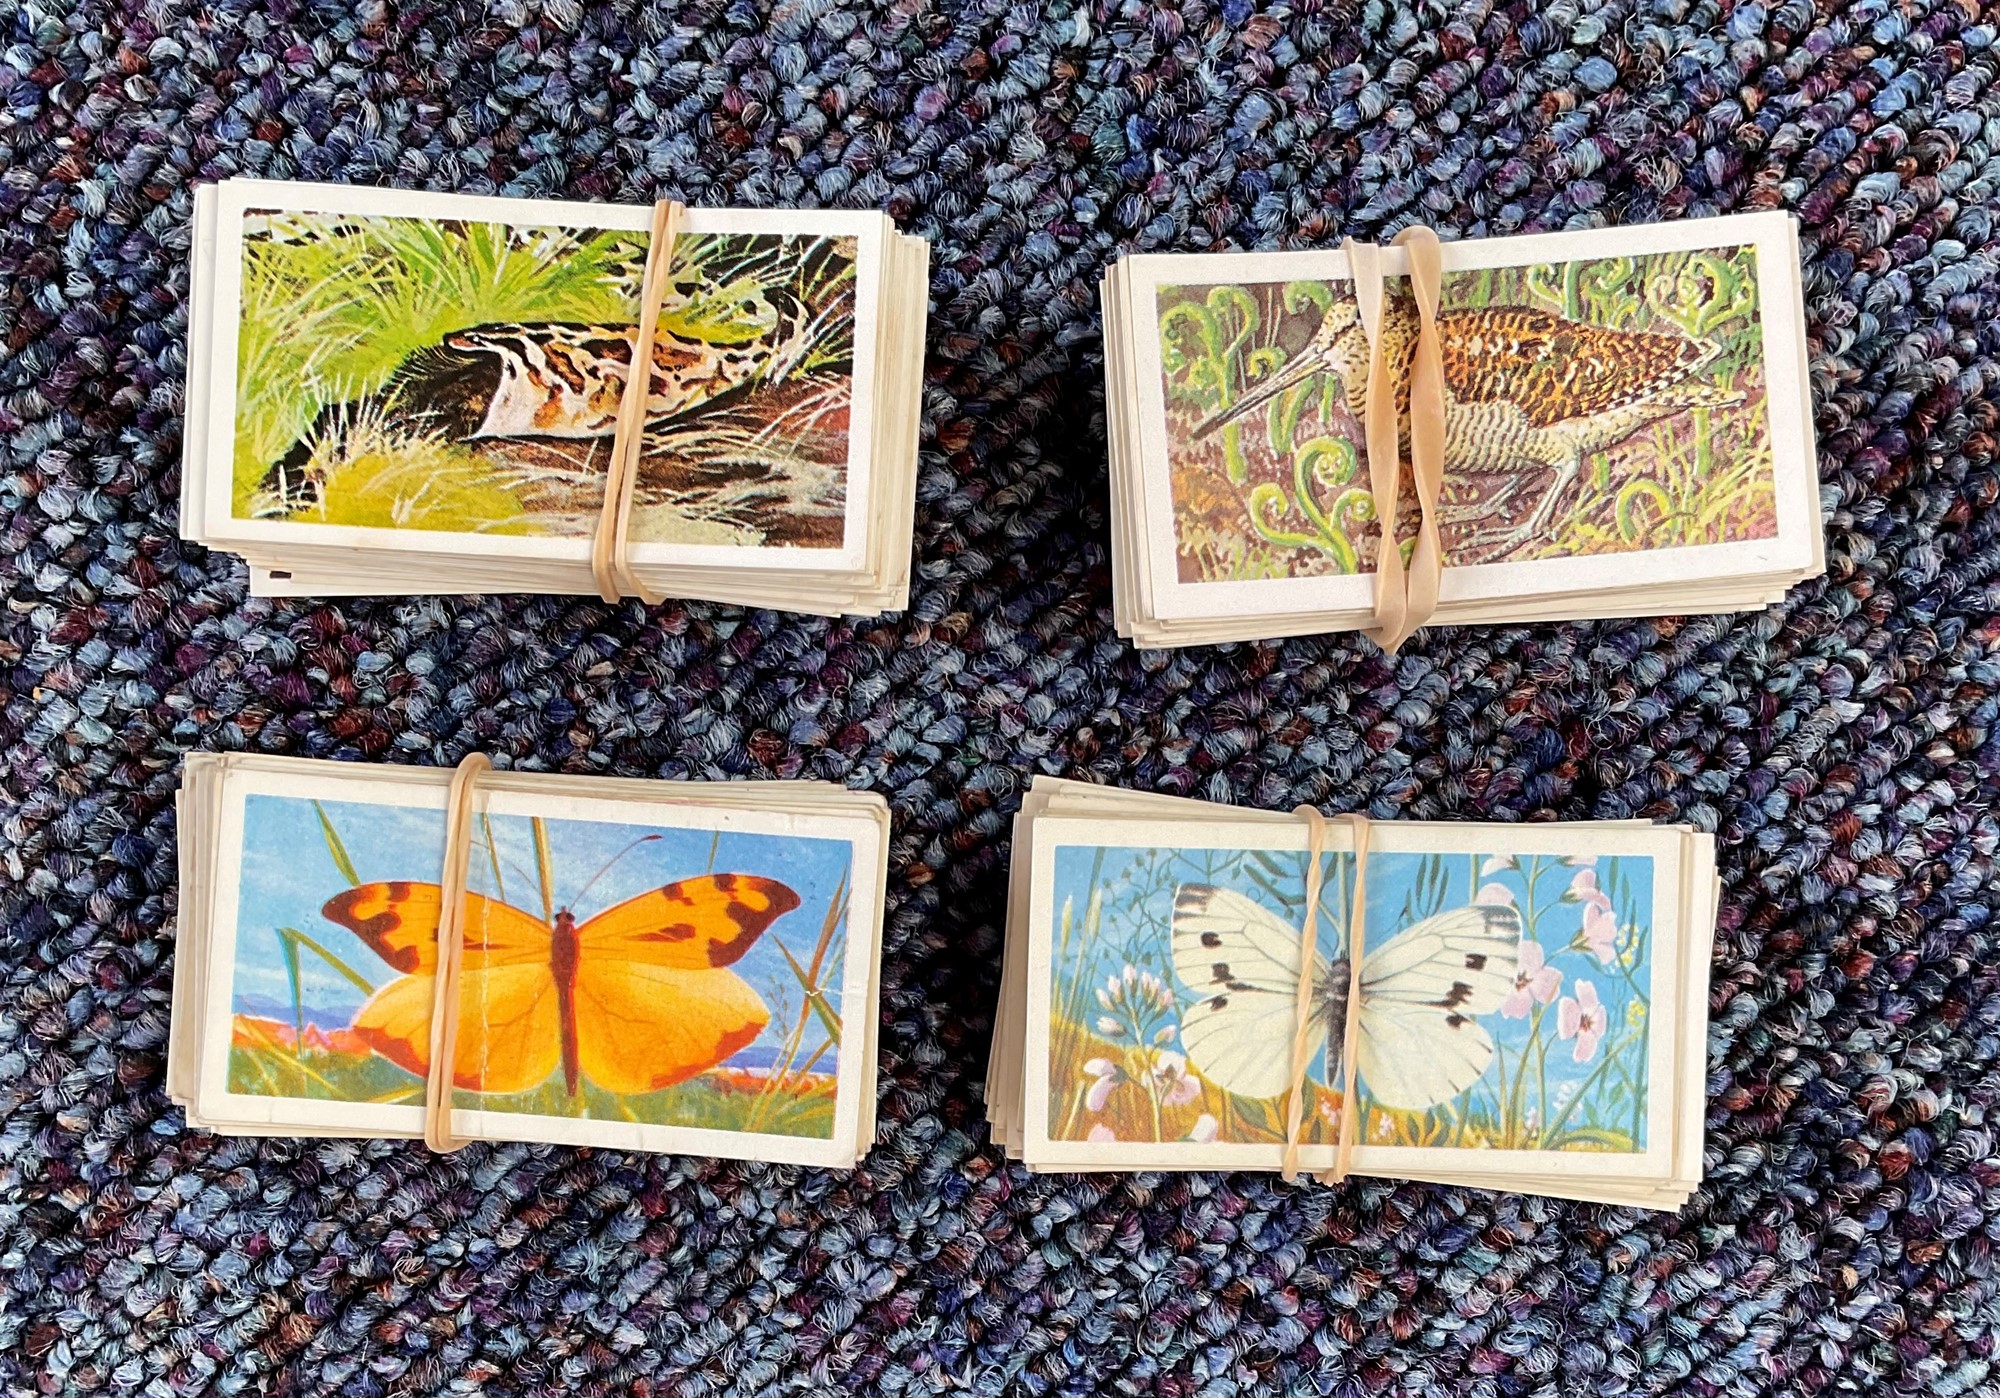 Tea card collection. 222 cards in total some duplication. Subjects include British butterflies, wild